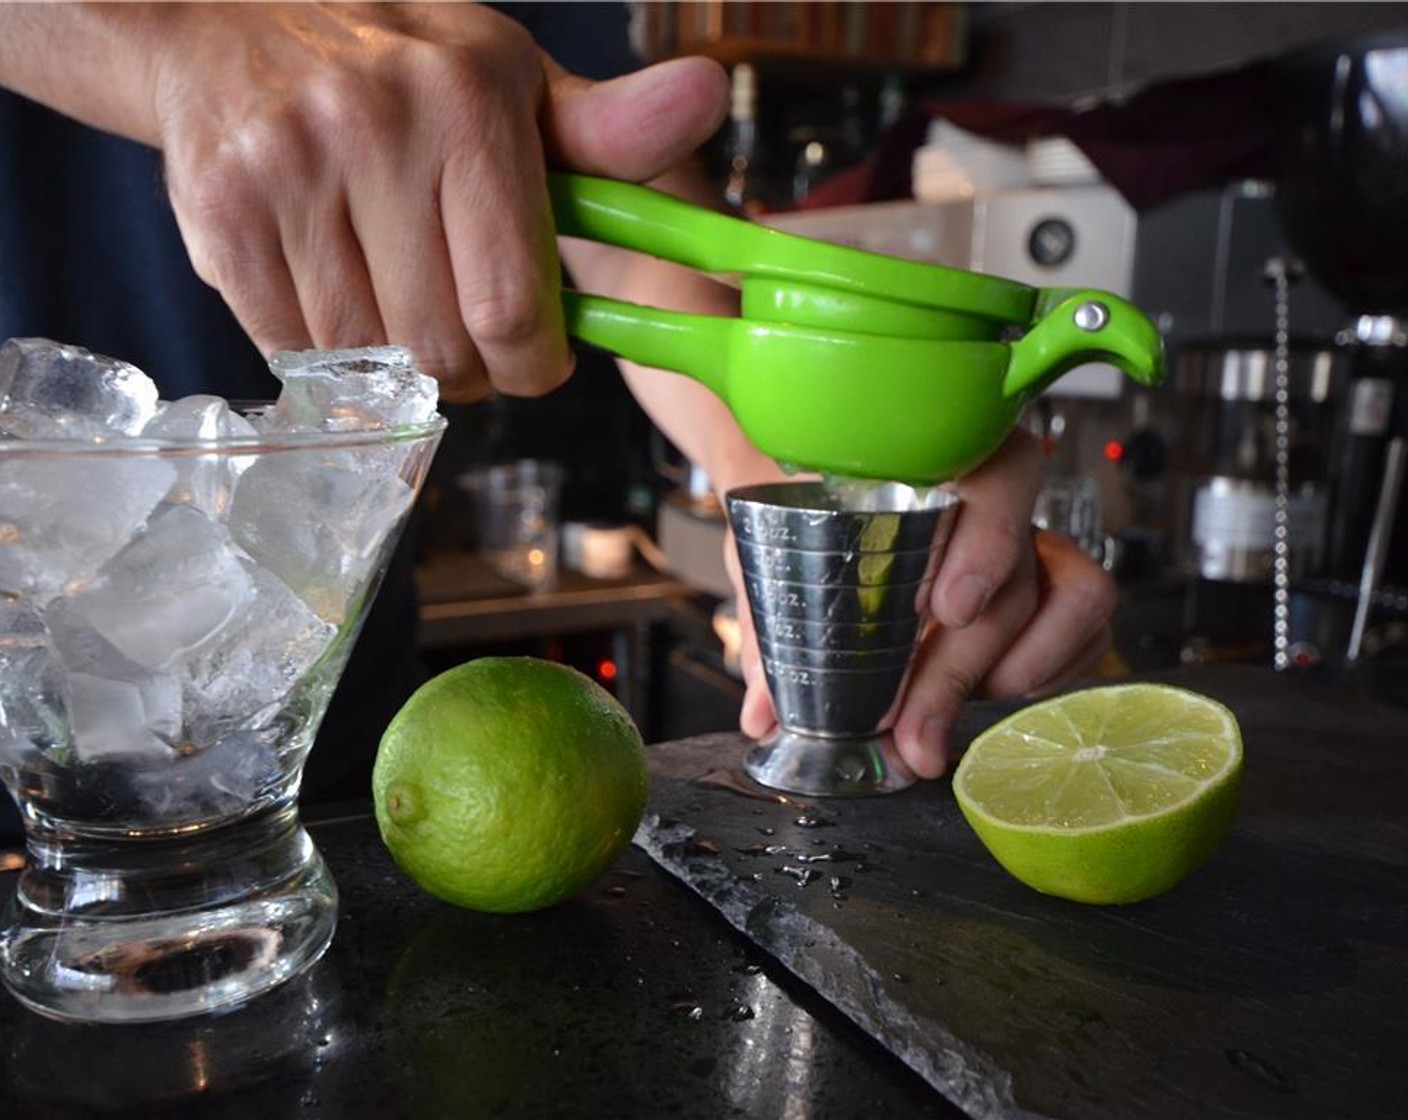 step 1 Fill a glass with ice and set aside. Prepare and measure the Lime Juice (1.5 fl oz).